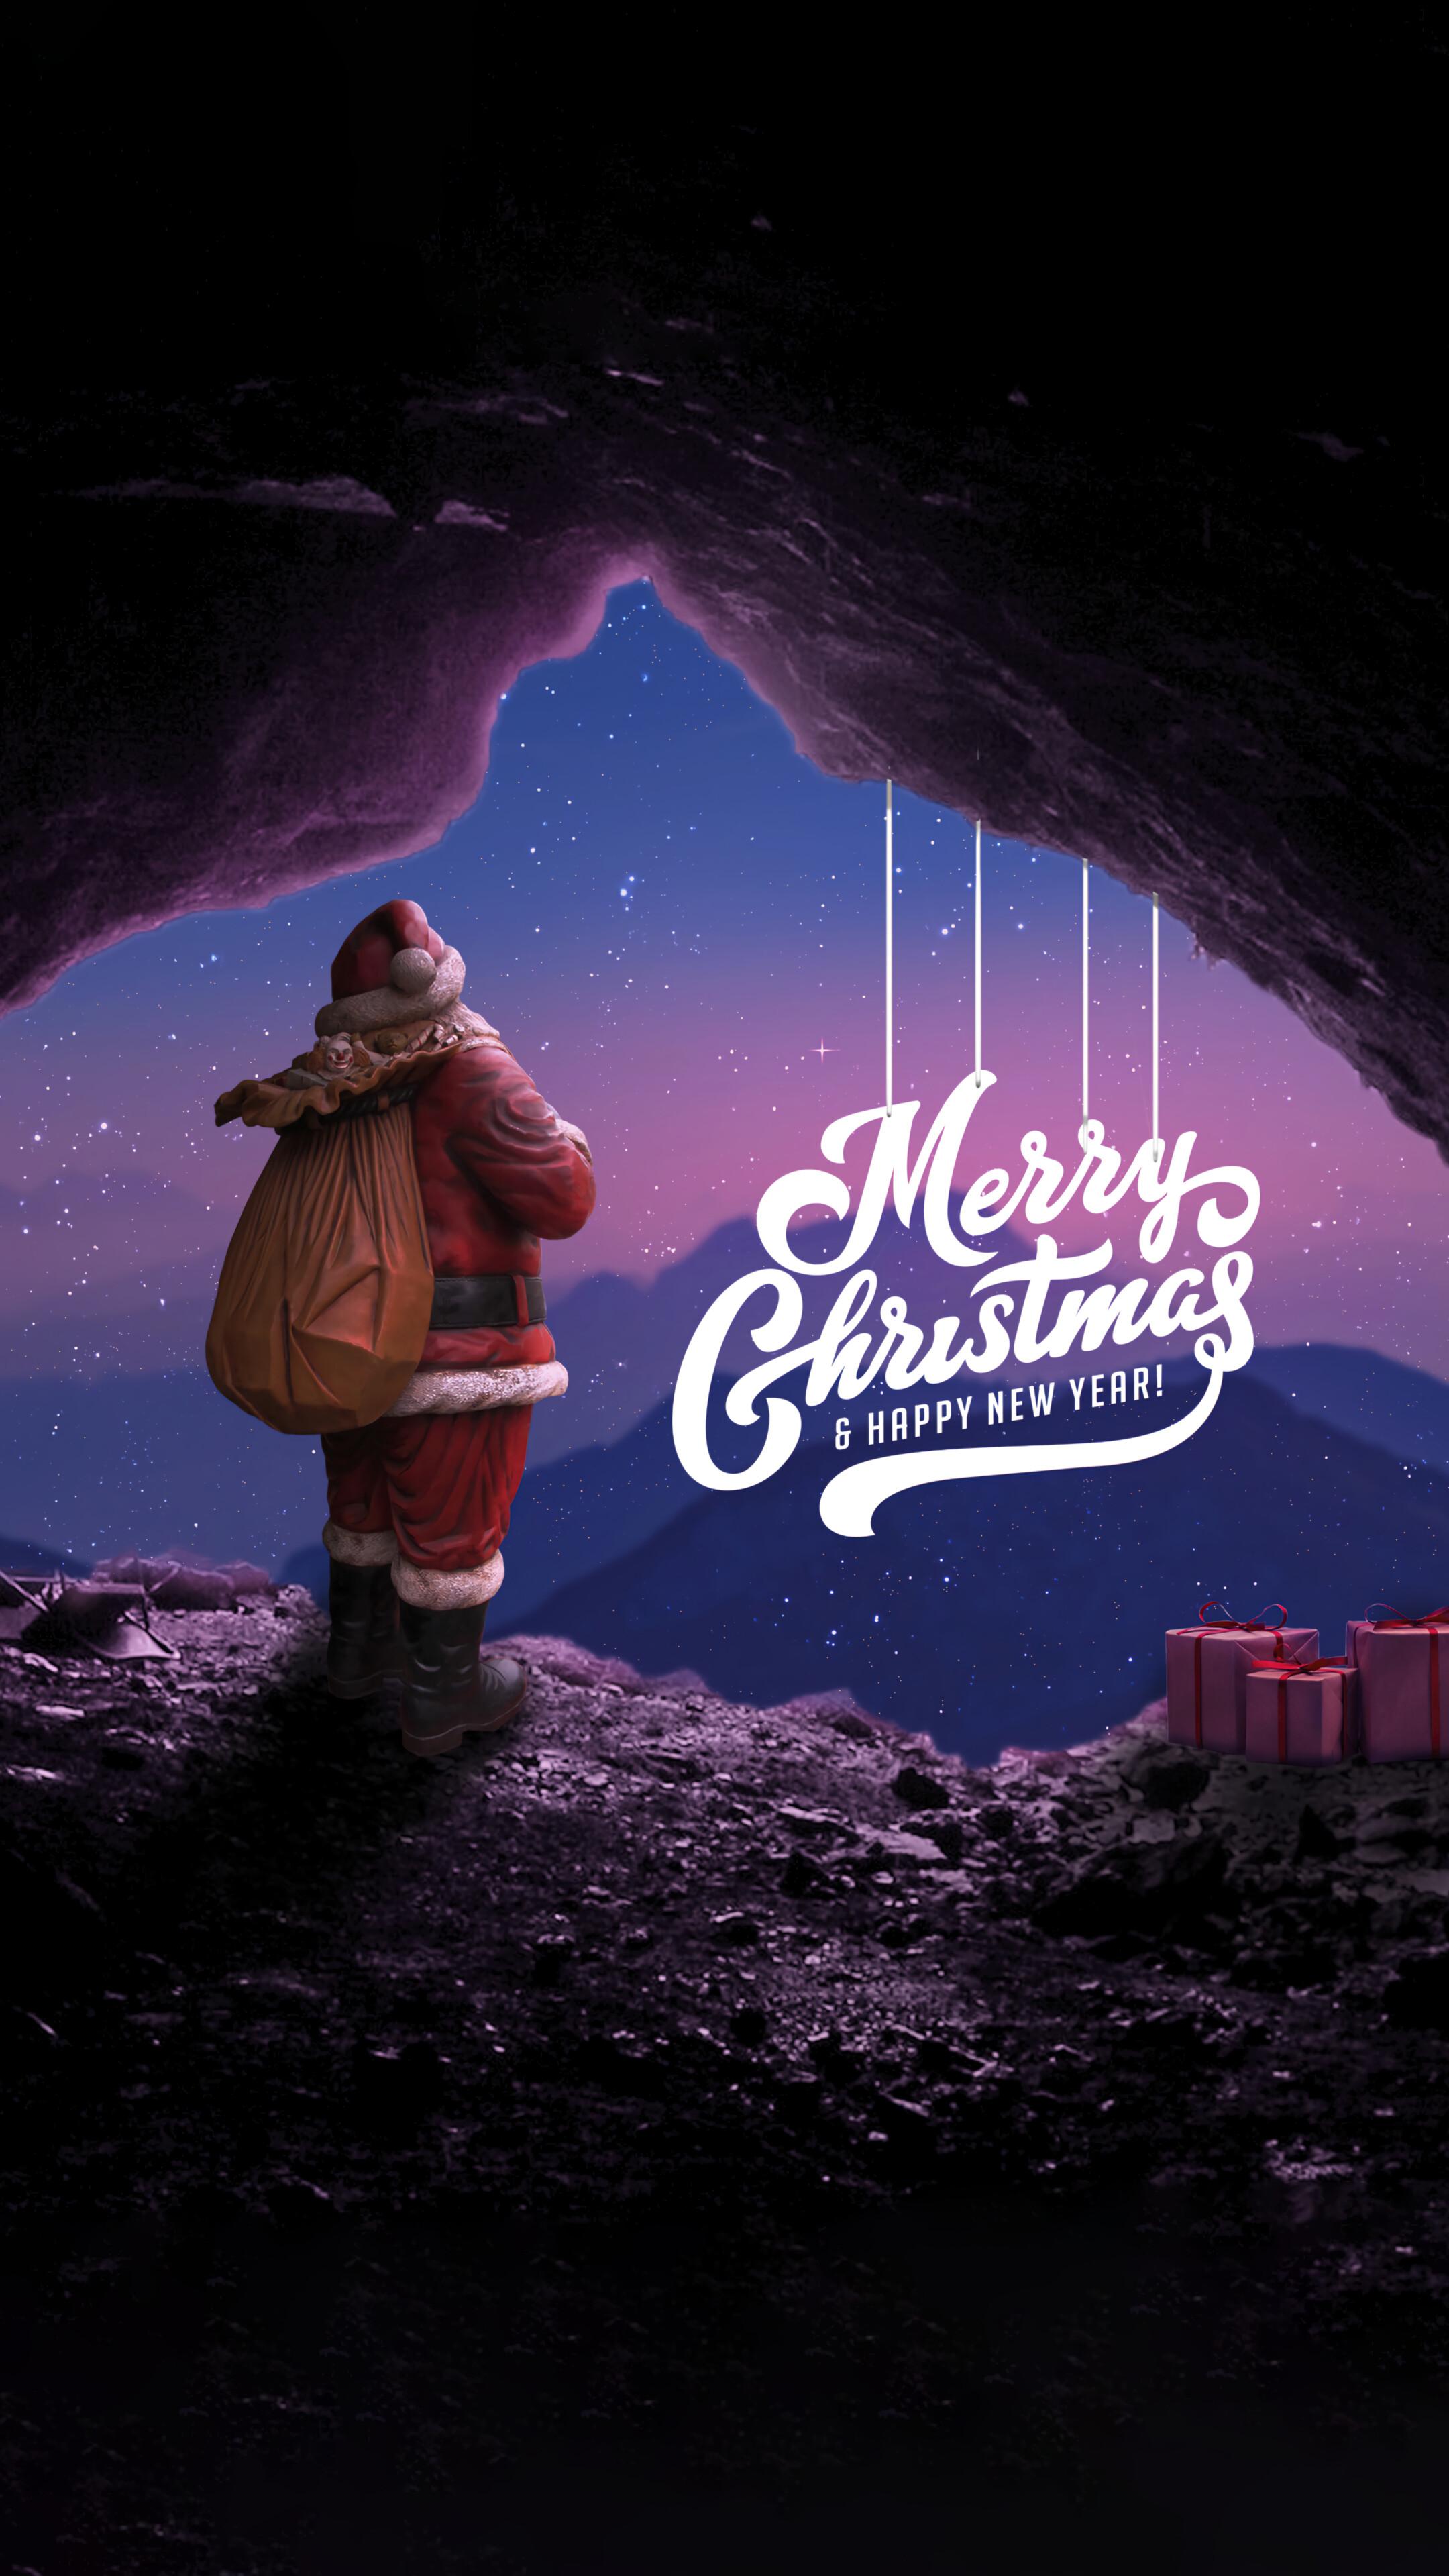 Merry Christmas and Happy New Year Santa Claus Gifts 4K Wallpaper